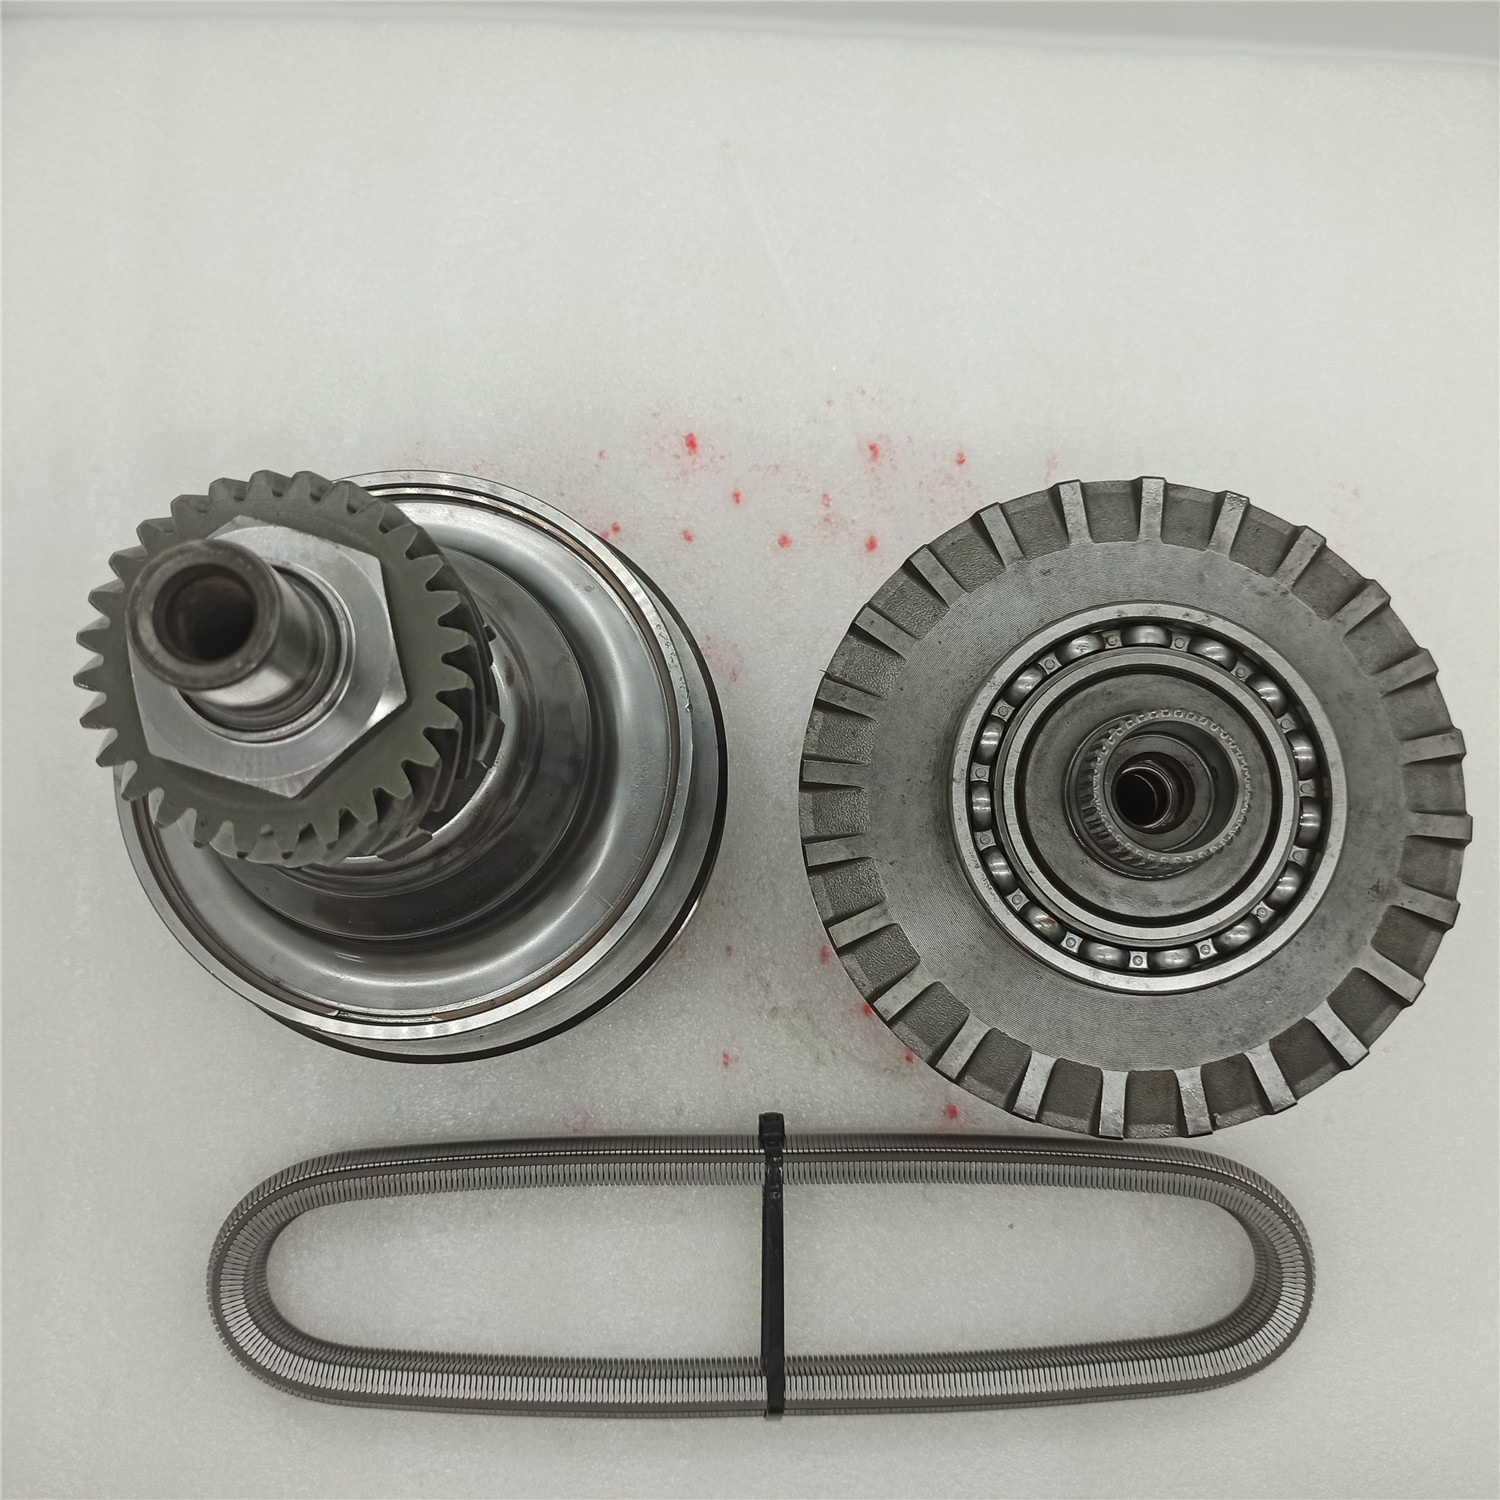 09A-0002-U1 JF010E RE0F09A CVT Automatic Transmission RE0F09A chain and sprocket for Gearbox sprocket wheel pulley set used for TEANA 3.5 Murano 3.5